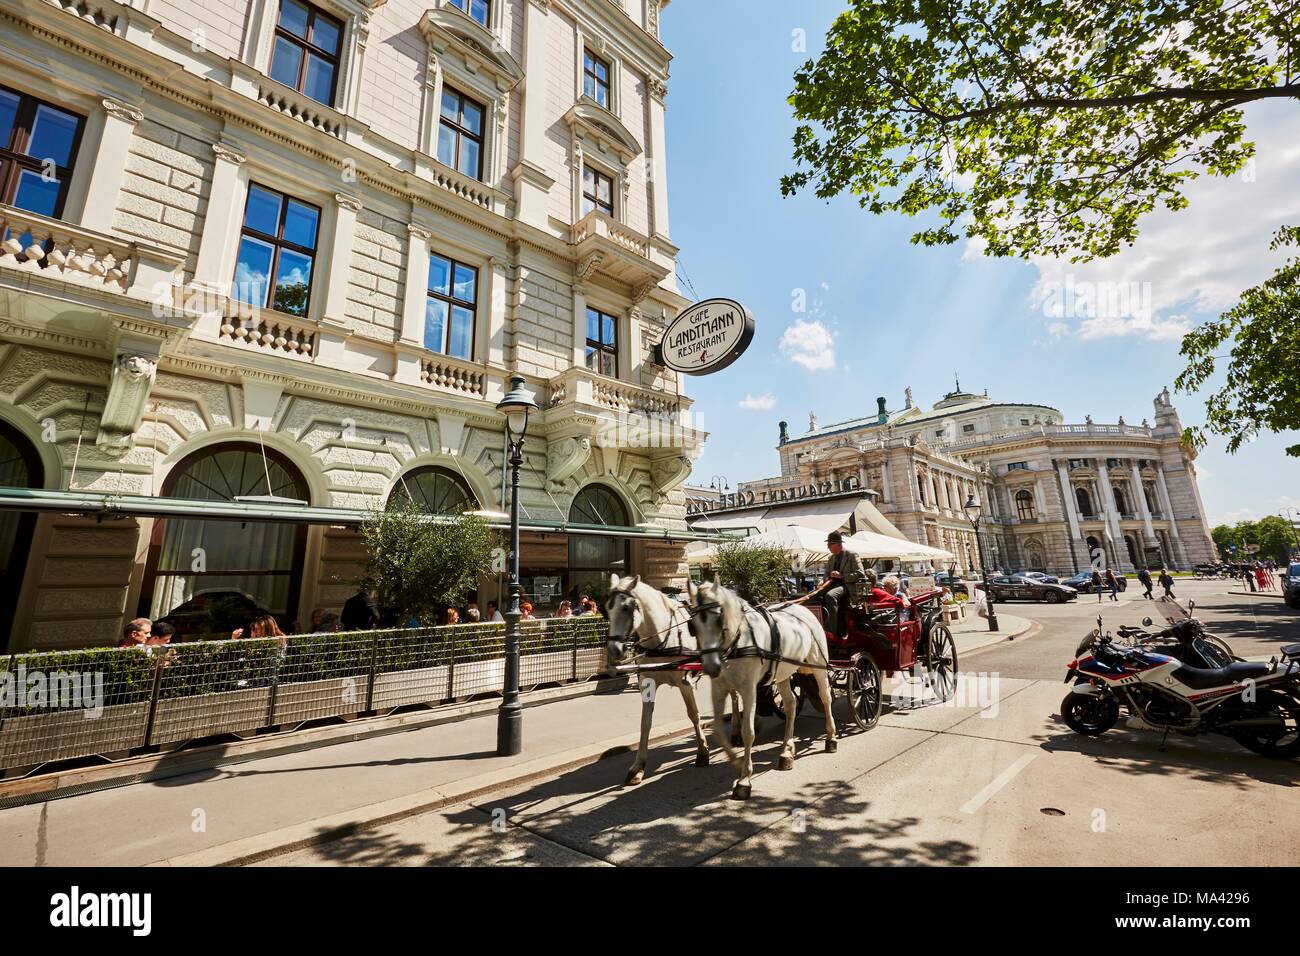 A coach and horses outside the 'Café Landtmann' coffee house in Vienna Stock Photo